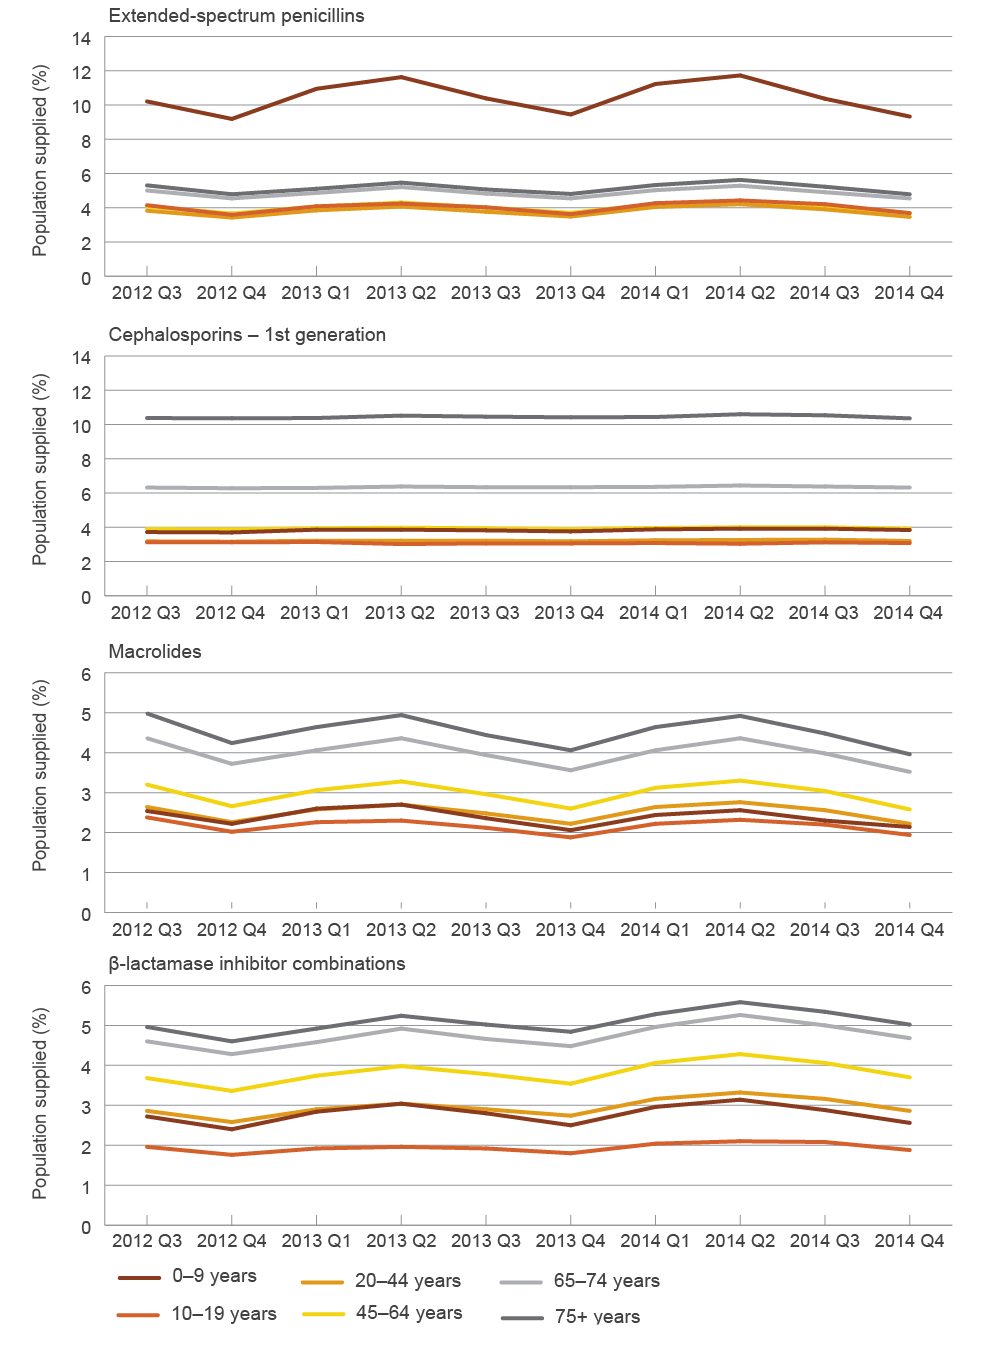 panel of four line graphs showing the percentage of the population supplied each antimicrobial. extended-spectrum penicillins were supplied in around 10–12% of the population of 0–9-year-olds each quarter, and around 4–6% of the population for other age groups. first-generation cephalosporins were supplied for around 10% of people aged 75 years and over, 6% of people aged 65–74 years, and 3–4% for other age groups. macrolides and beta-lactamase inhibitor combinations were supplied for around 5–6% of people aged 65 or over, and 2–4% for other age groups.